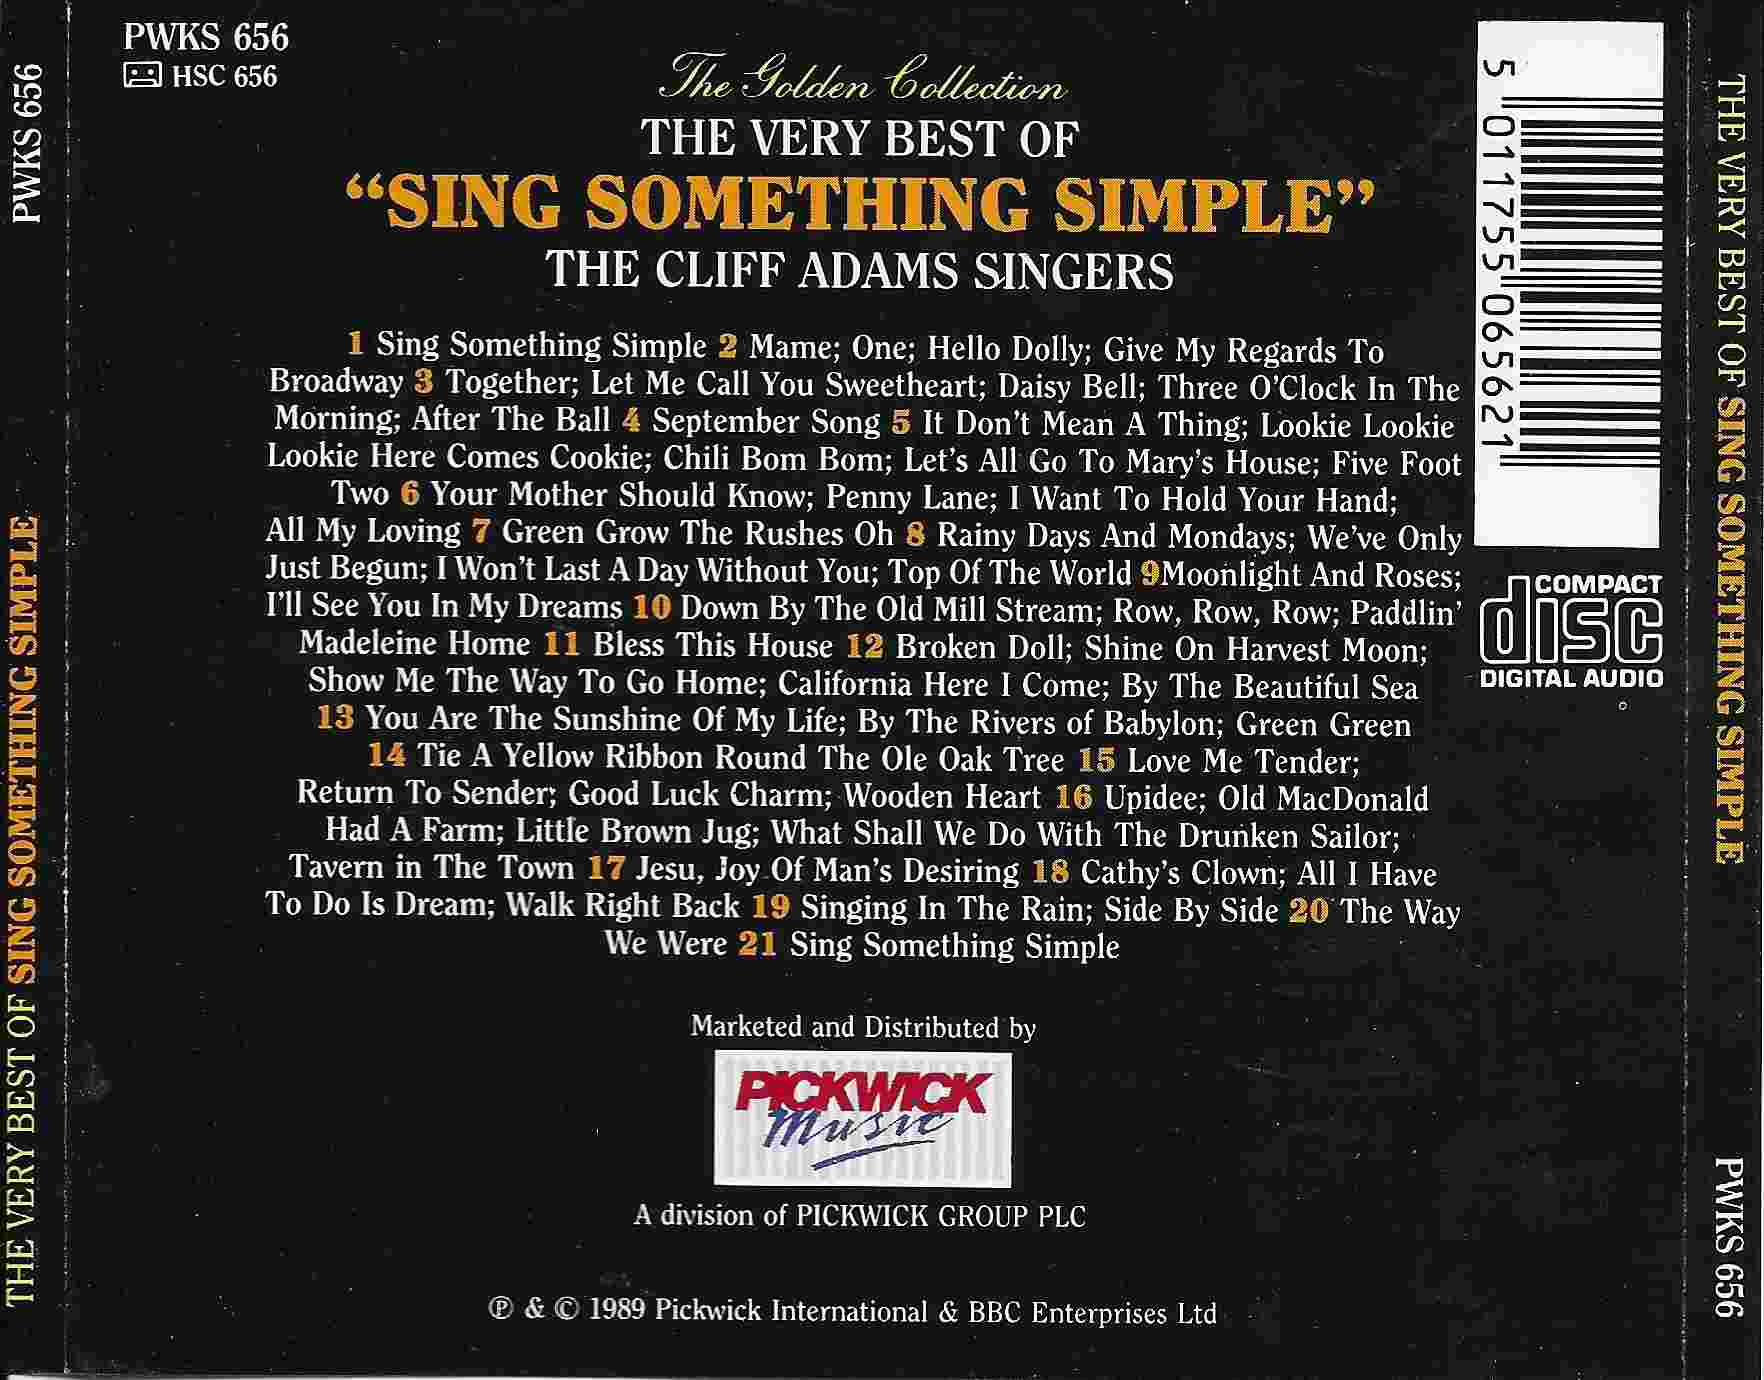 Picture of PWKS 656 The very best of Sing Something Simple by artist Various from the BBC records and Tapes library